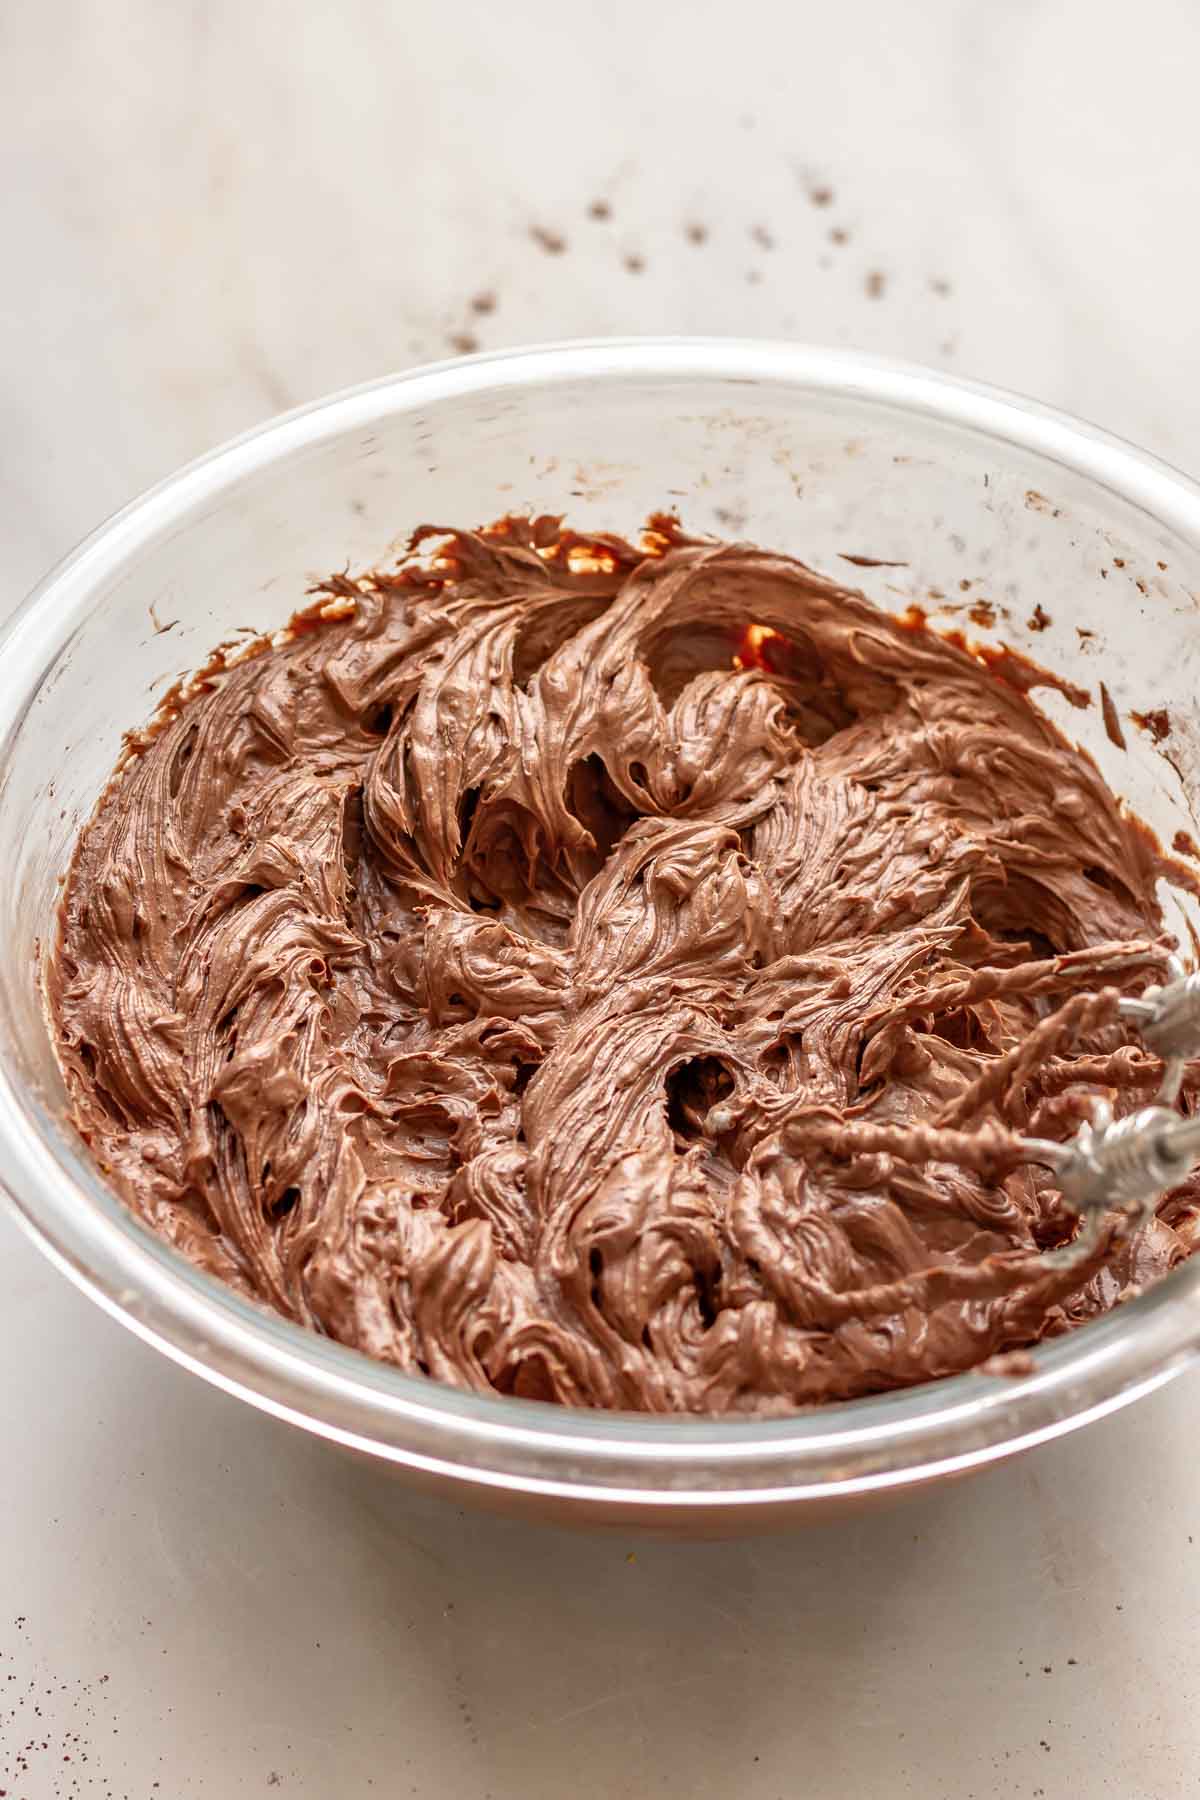 A hand mixer beats together chocolate cheesecake filling.